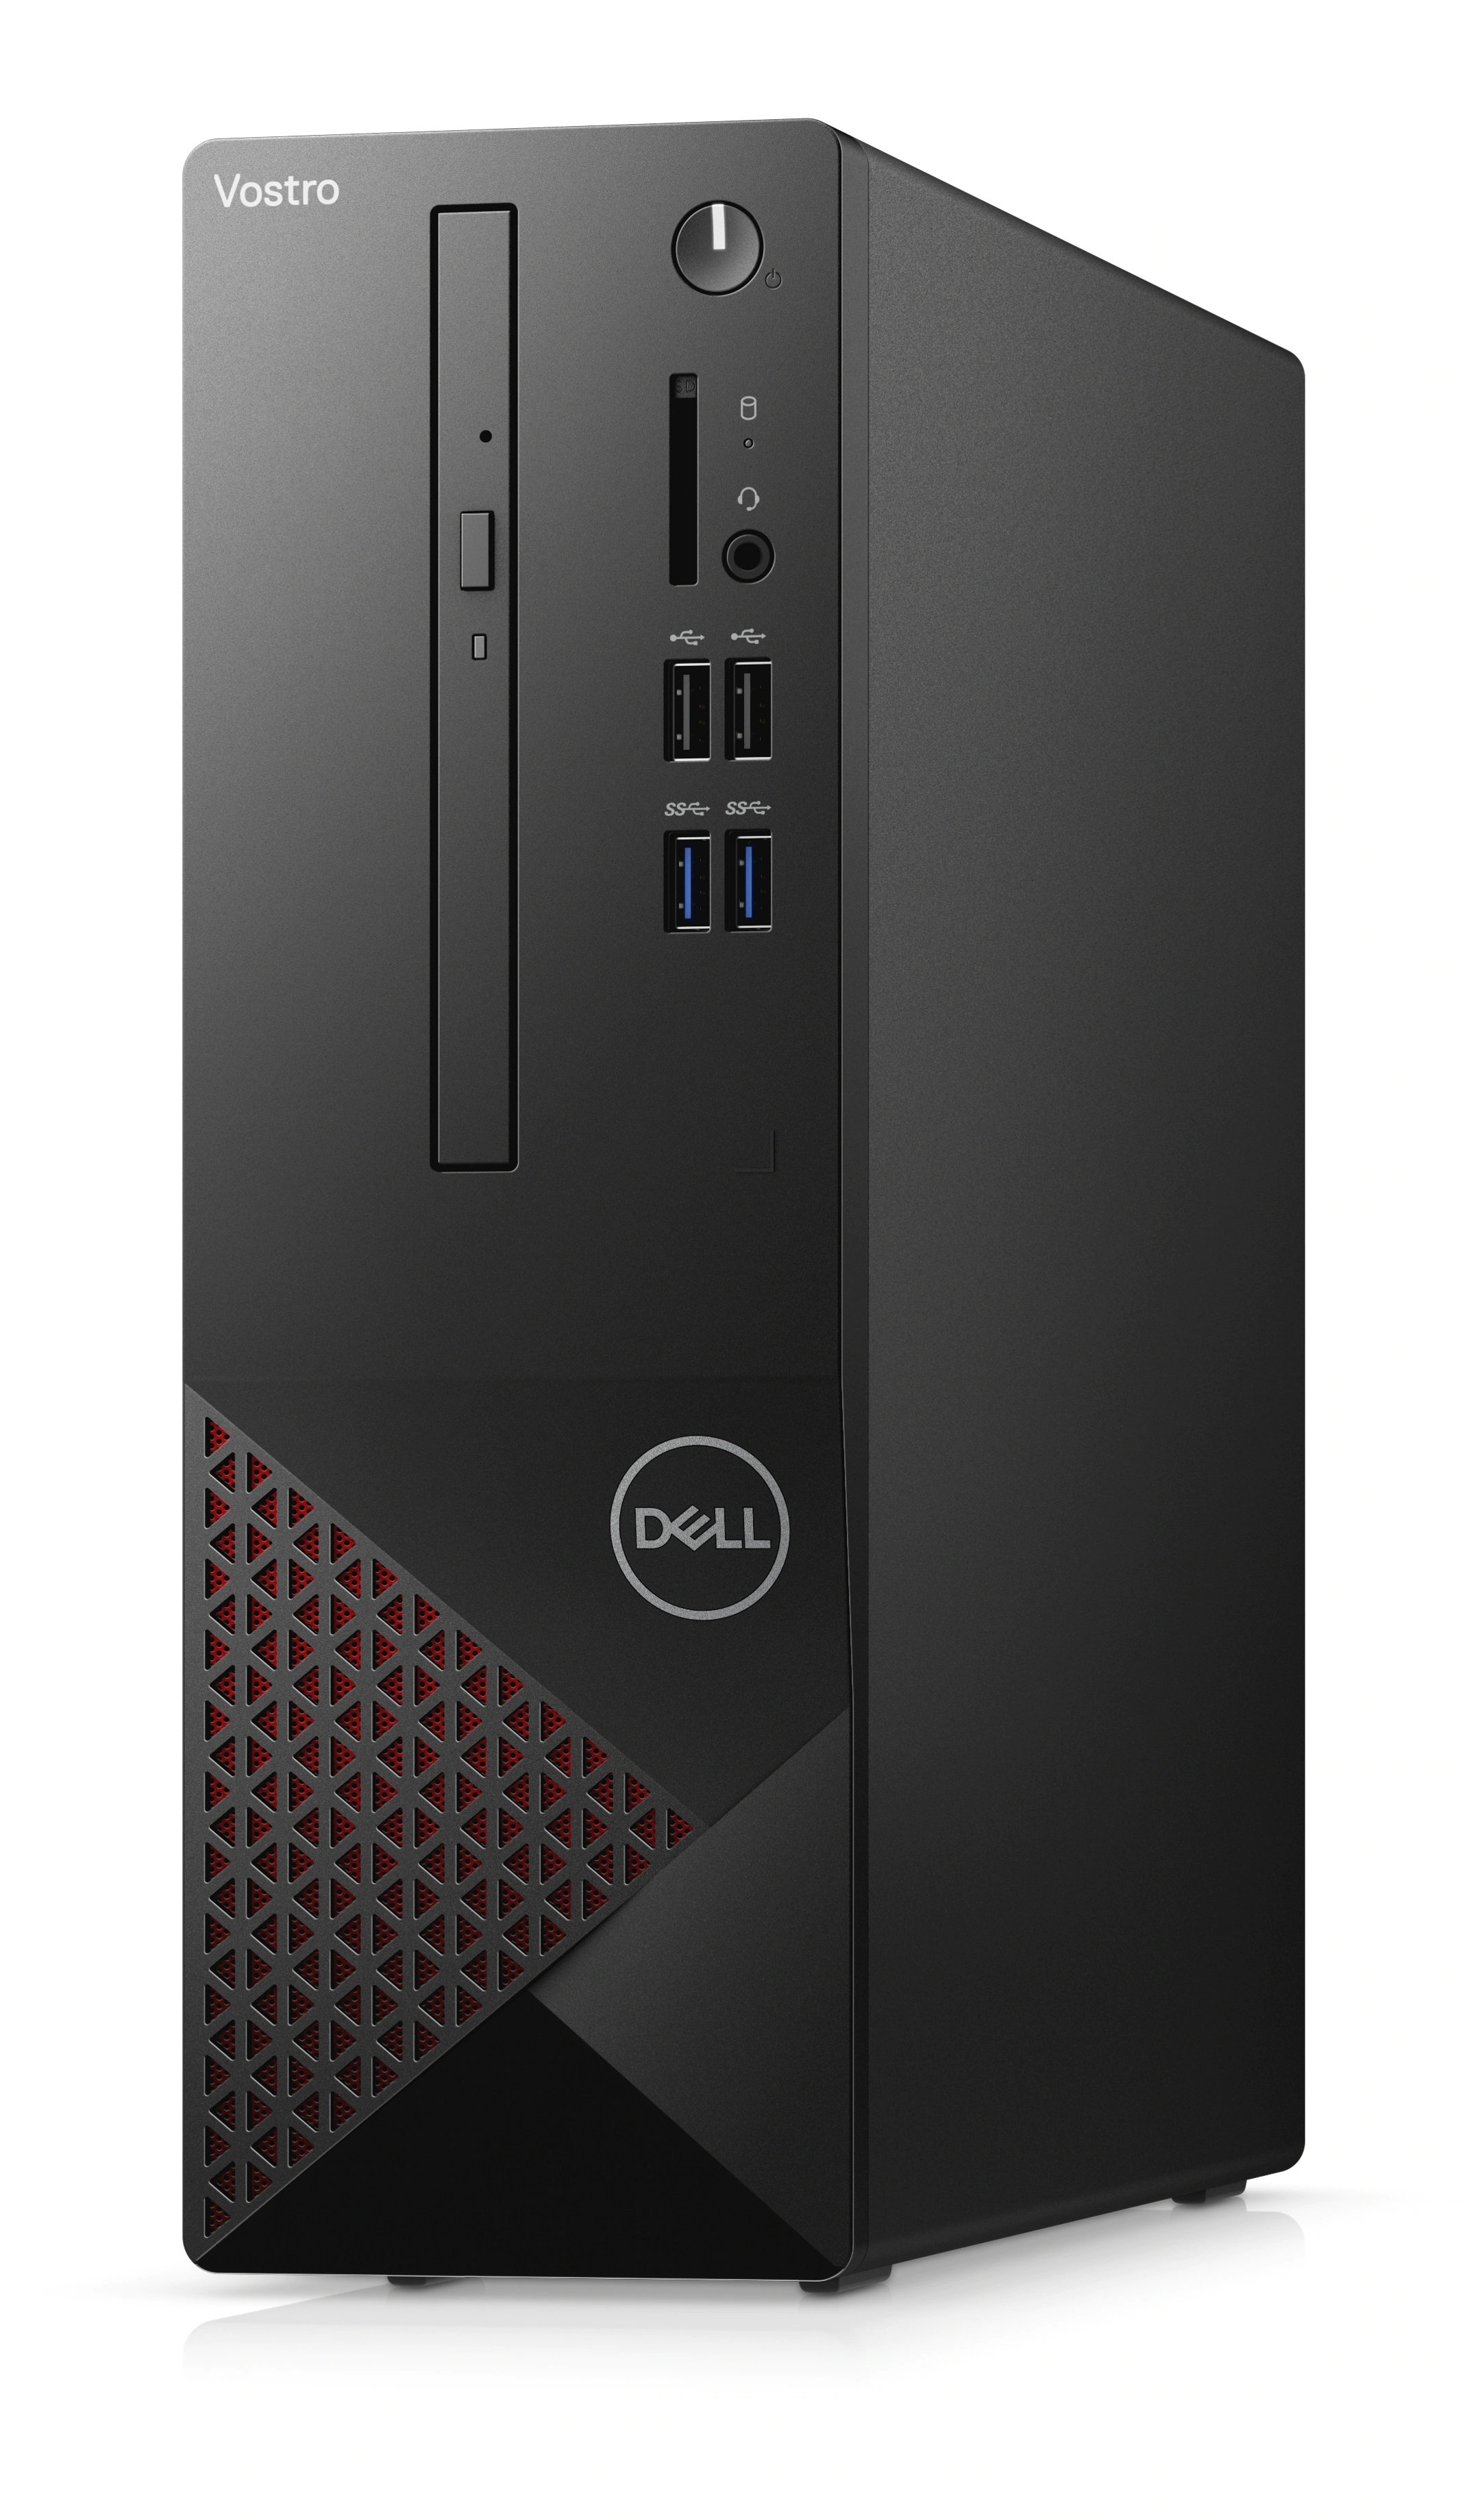 Dell additional 5% Off Vostro Small Desktop with discount code